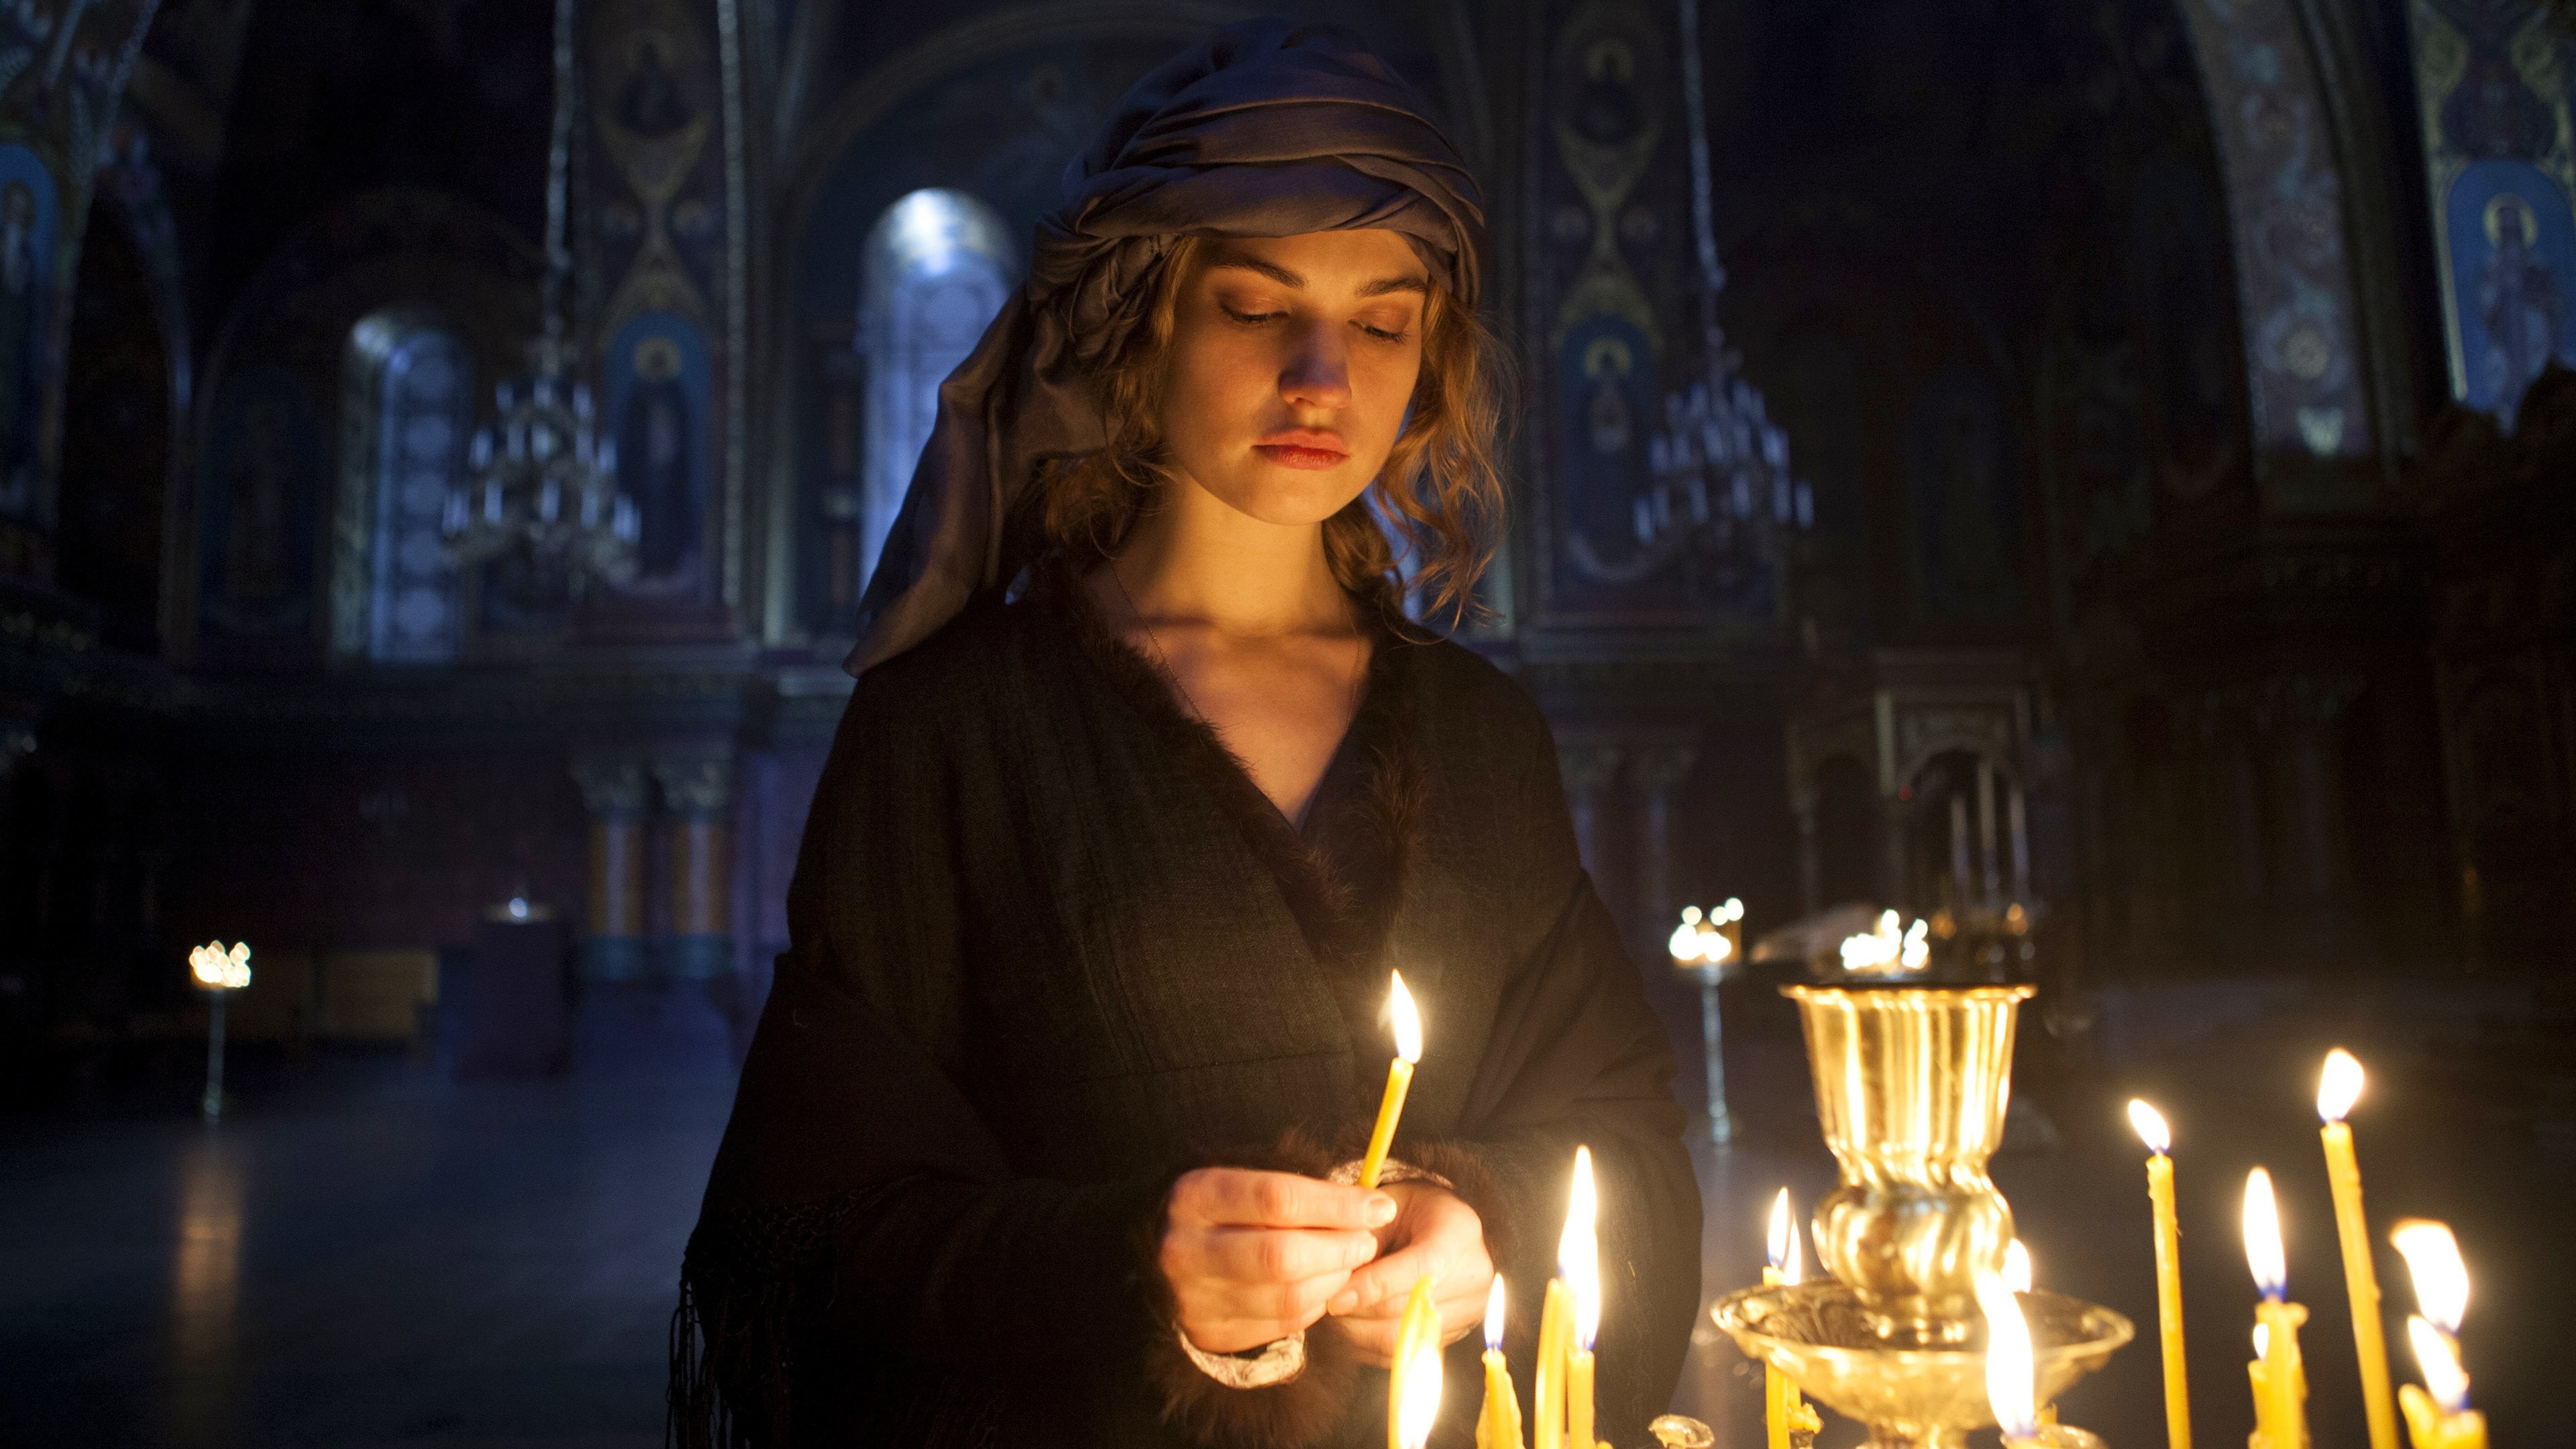 woman wearing black holding candle, War & Peace, Lily James